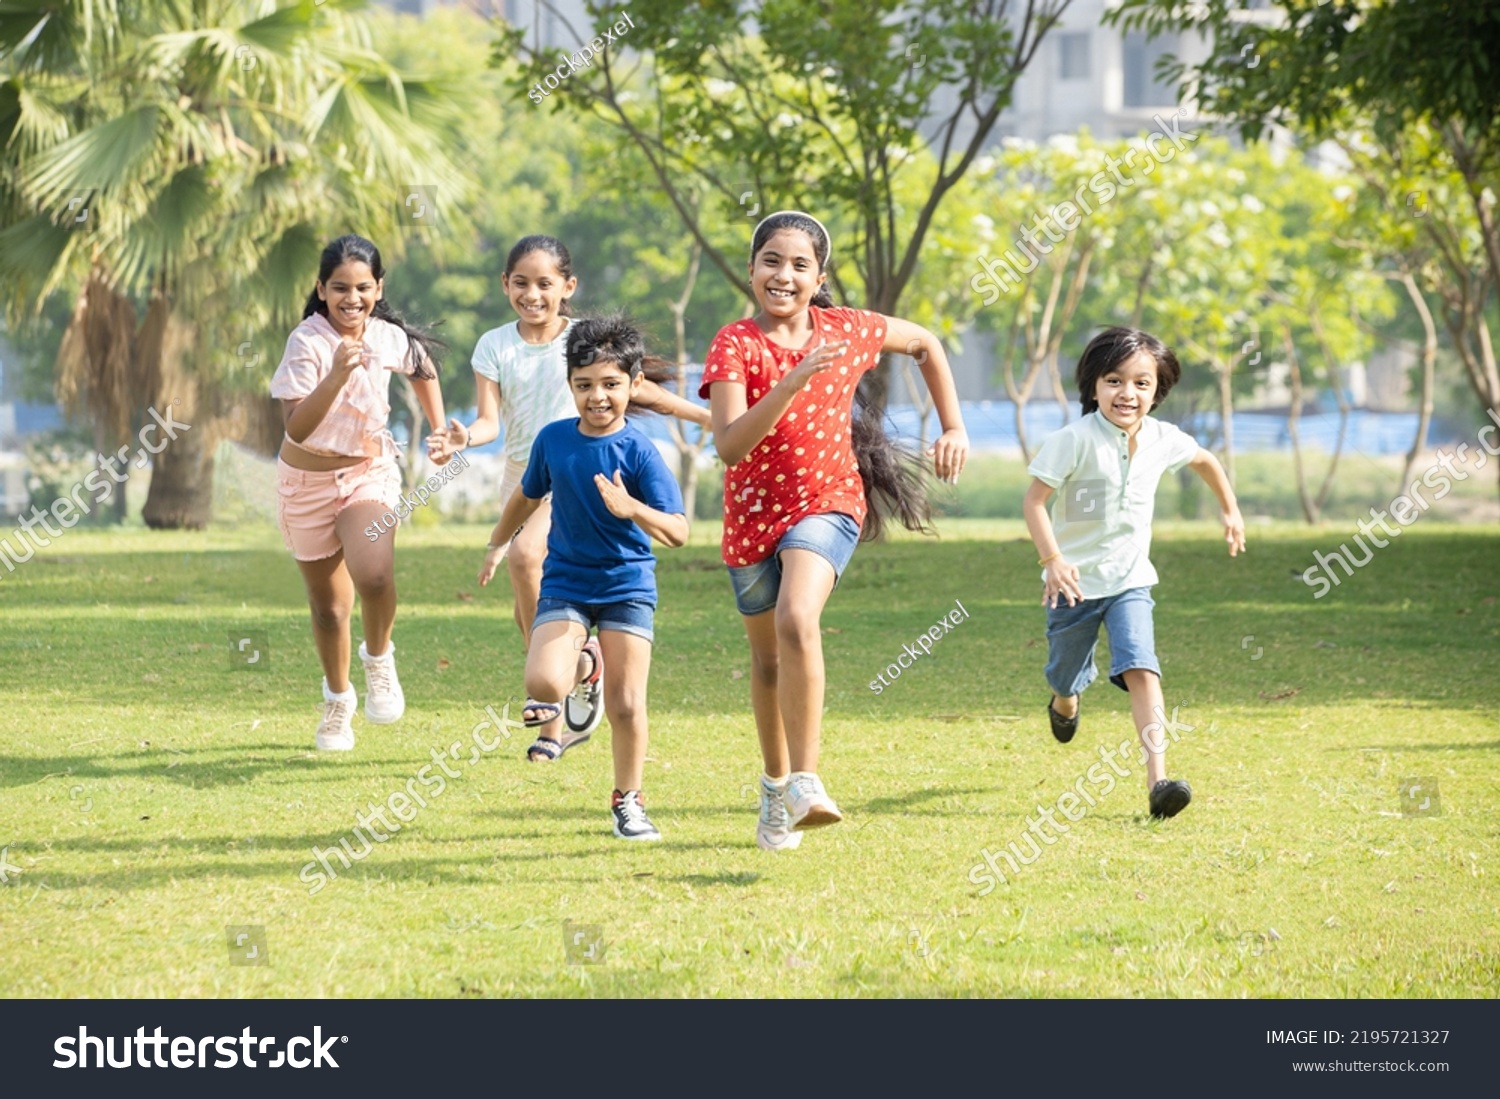 Group of happy playful Indian children running outdoors in spring park. Asian kids Playing in garden. Summer holidays.  #2195721327